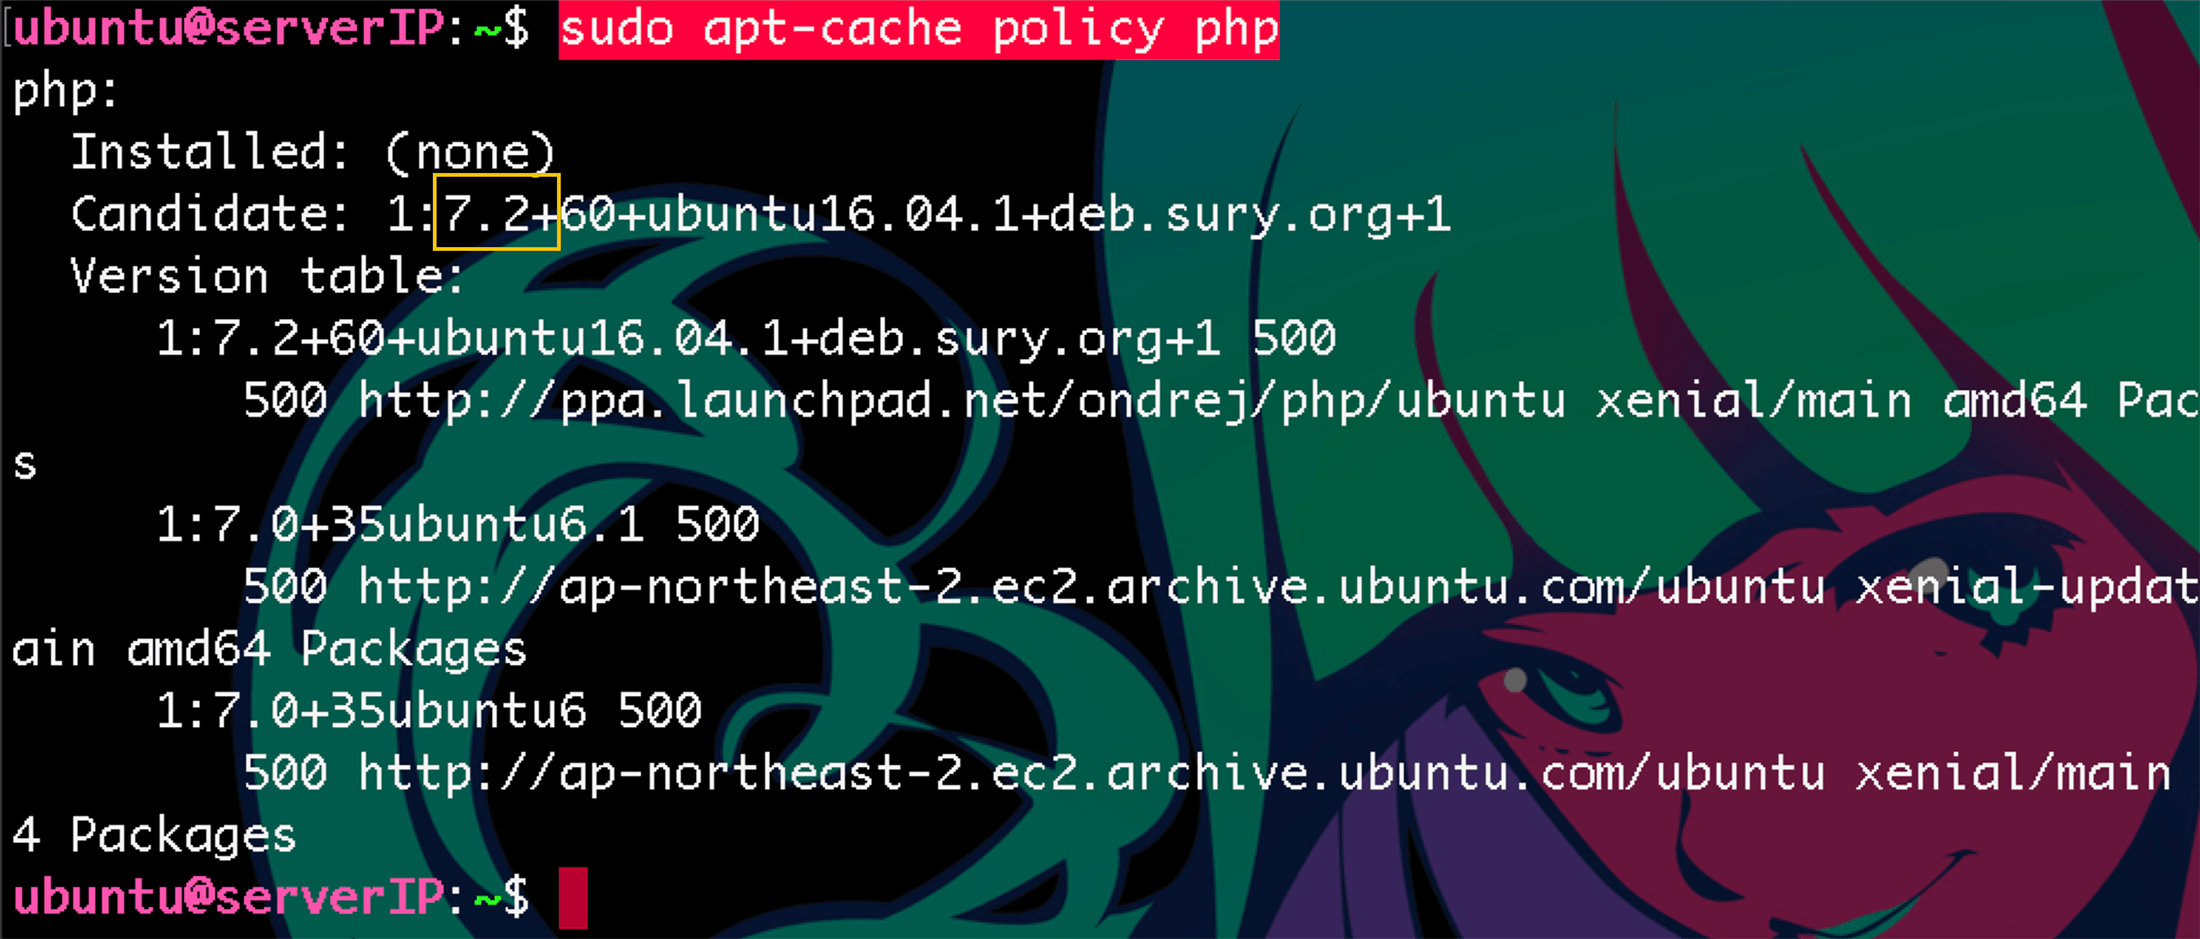 apt policy php 보기